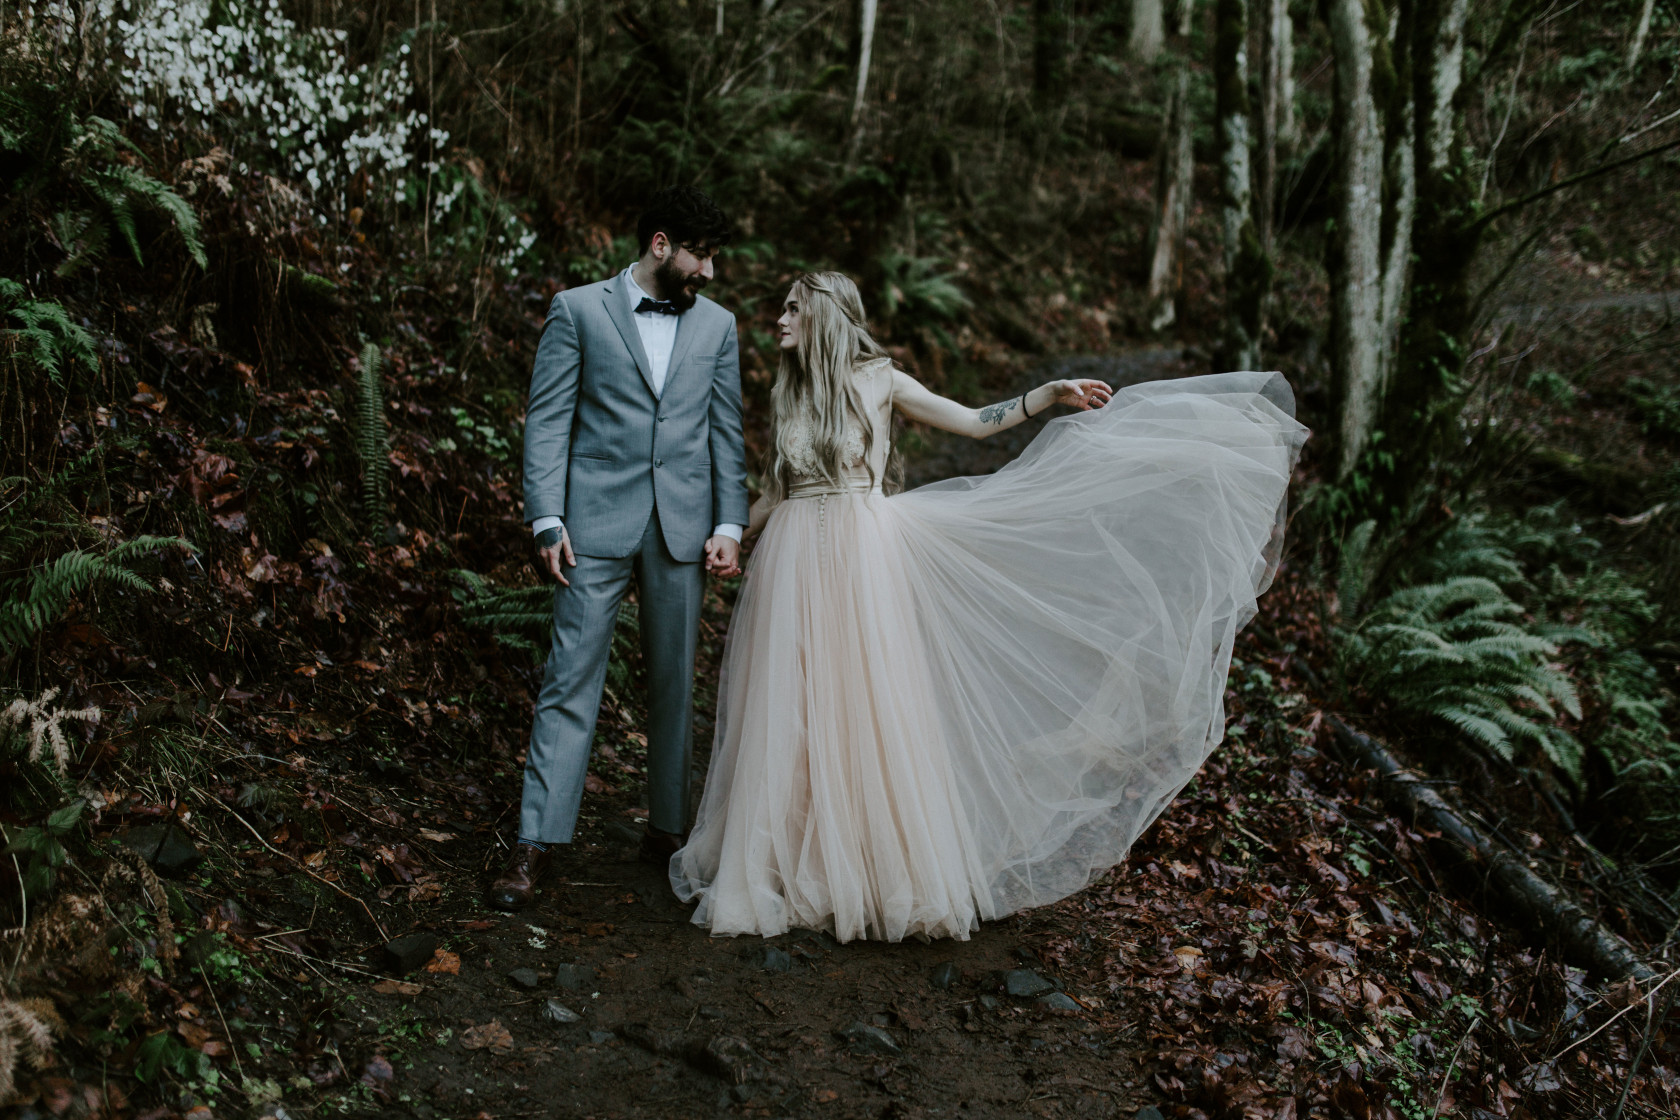 Boris and Tyanna admire each other. Adventure elopement in the Columbia River Gorge by Sienna Plus Josh.